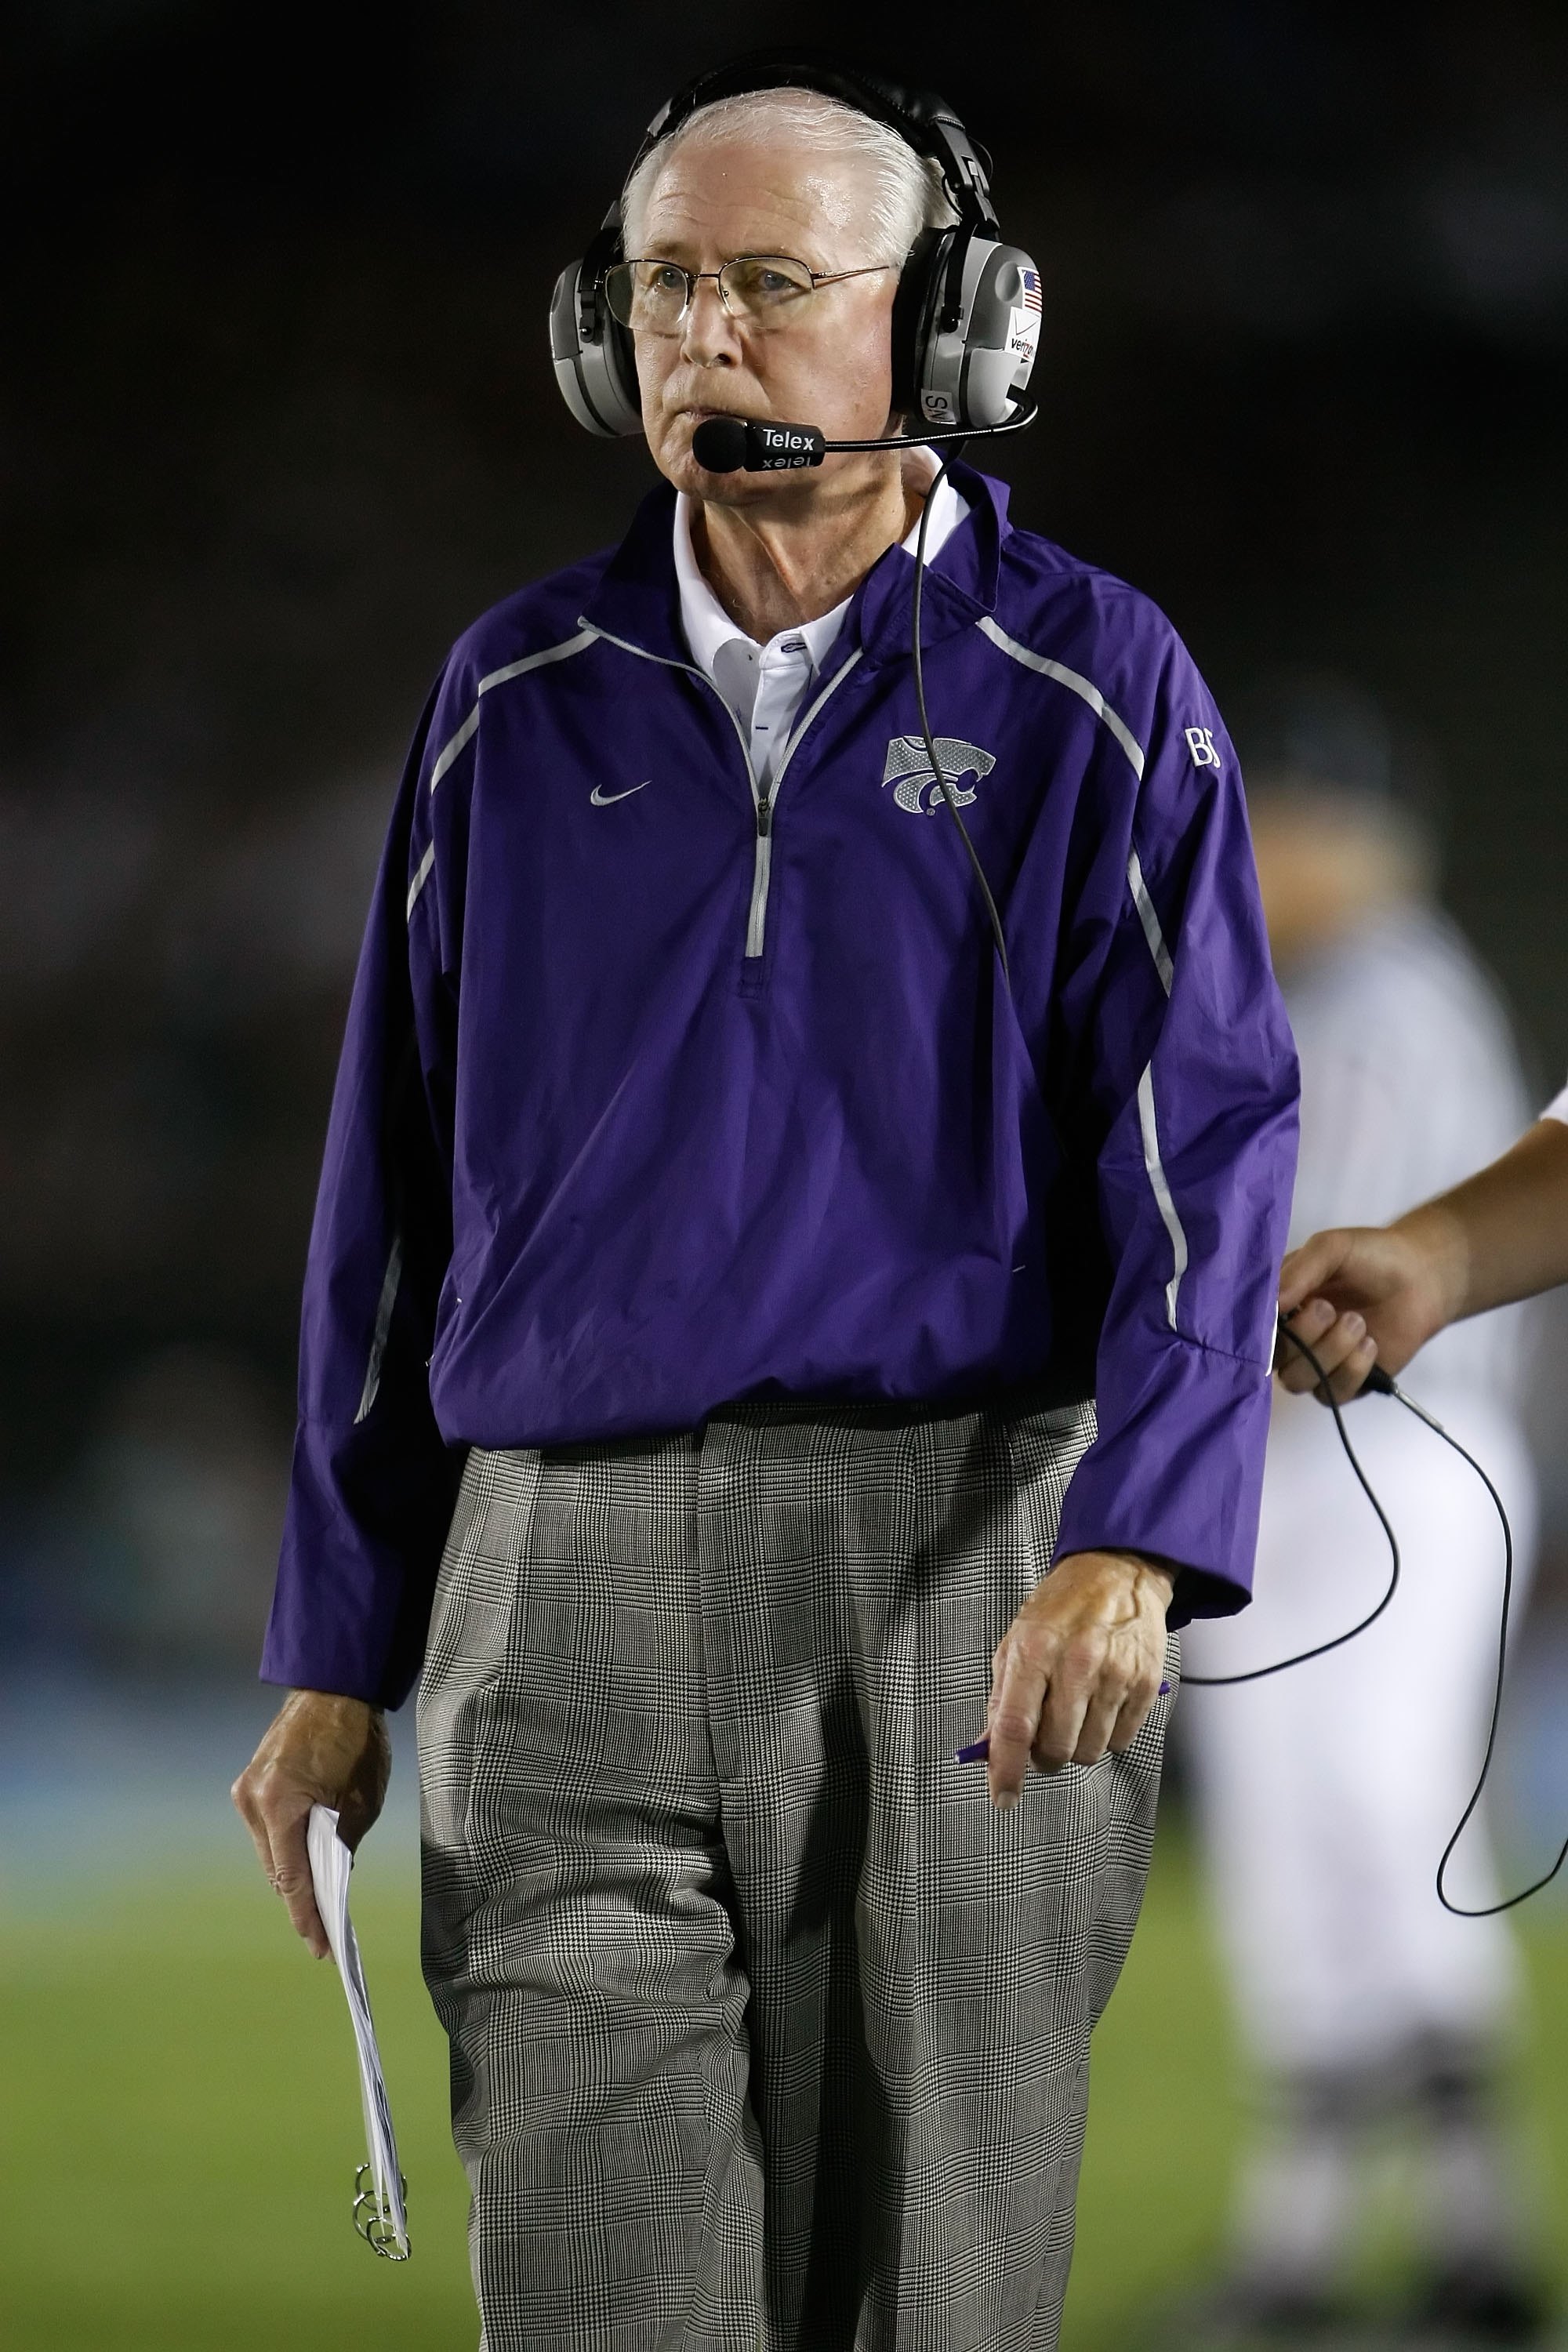 PASADENA, CA - SEPTEMBER 19:  Kansas State Wildcats head coach Bill Snyder looks on against the UCLA Bruins at the Rose Bowl on September 19, 2009 in Pasadena, California. UCLA defeated Kansas State 23-9.  (Photo by Jeff Gross/Getty Images)